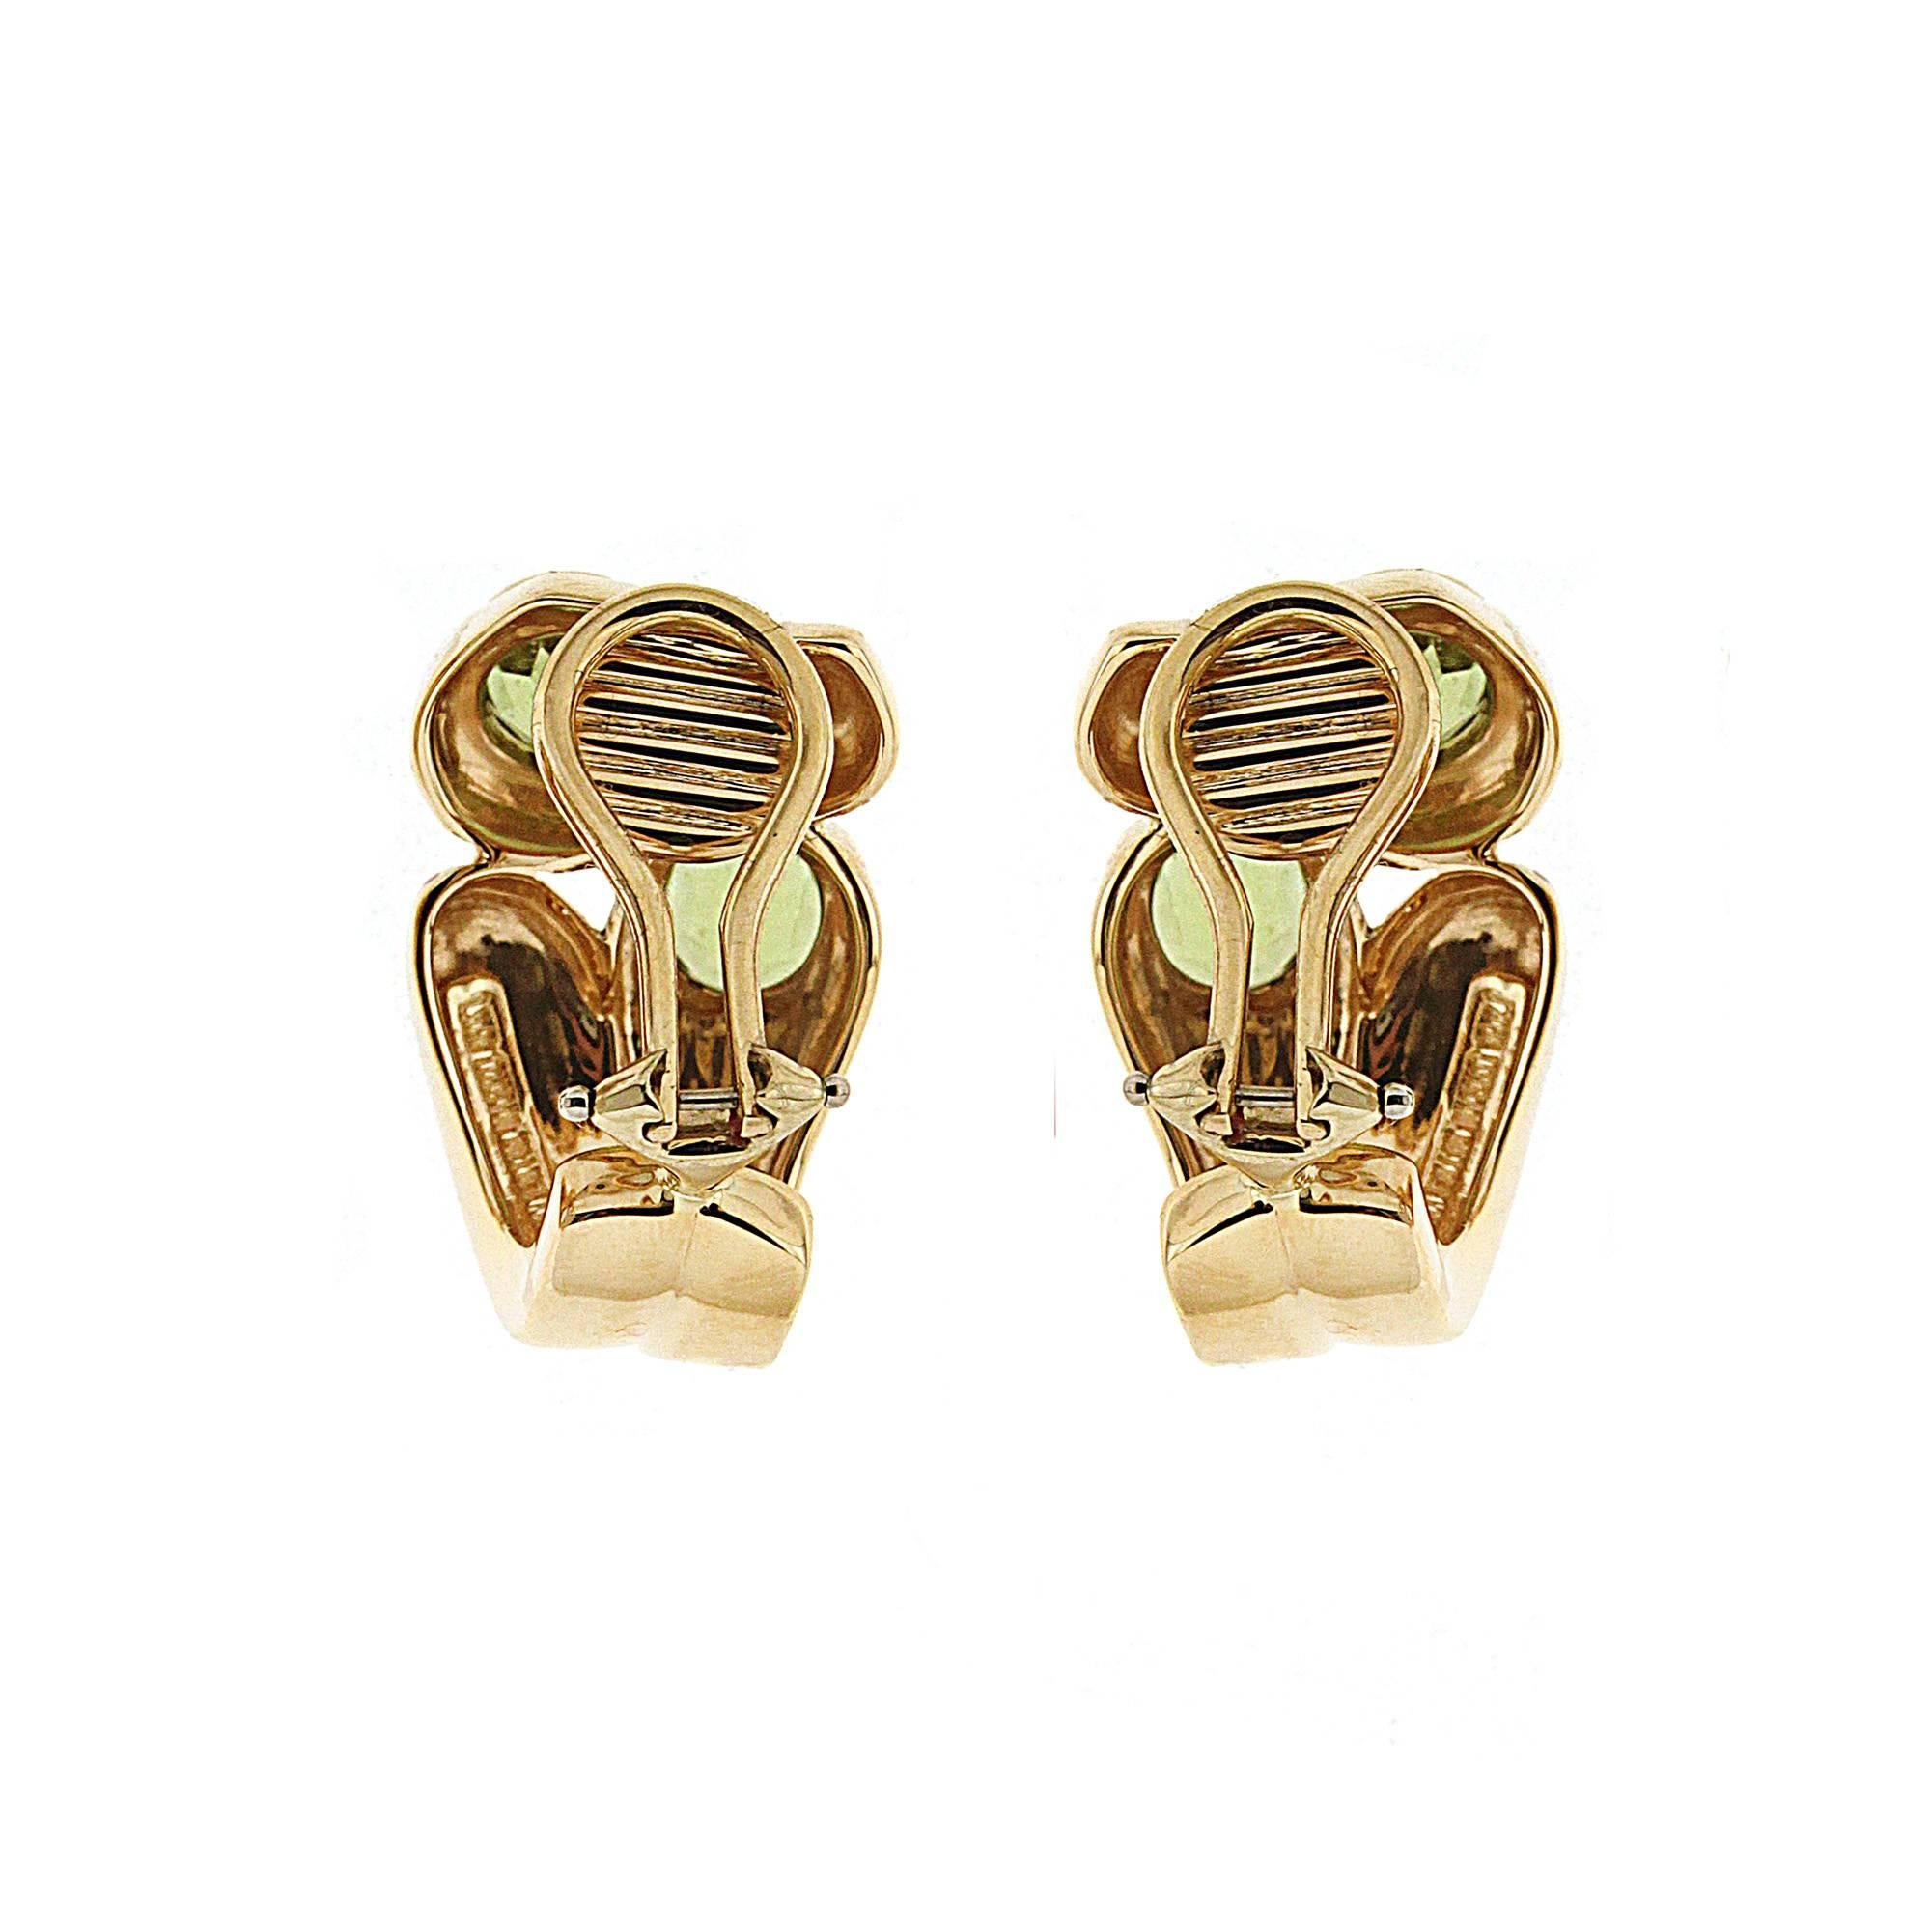 For decades, Valentin Magro's fine jewelry creations have illuminated the most special of occasions. These earrings are made in 18kt yellow gold they feature four round faceted peridot stones and are finished with clip-backs. Matching Rings also